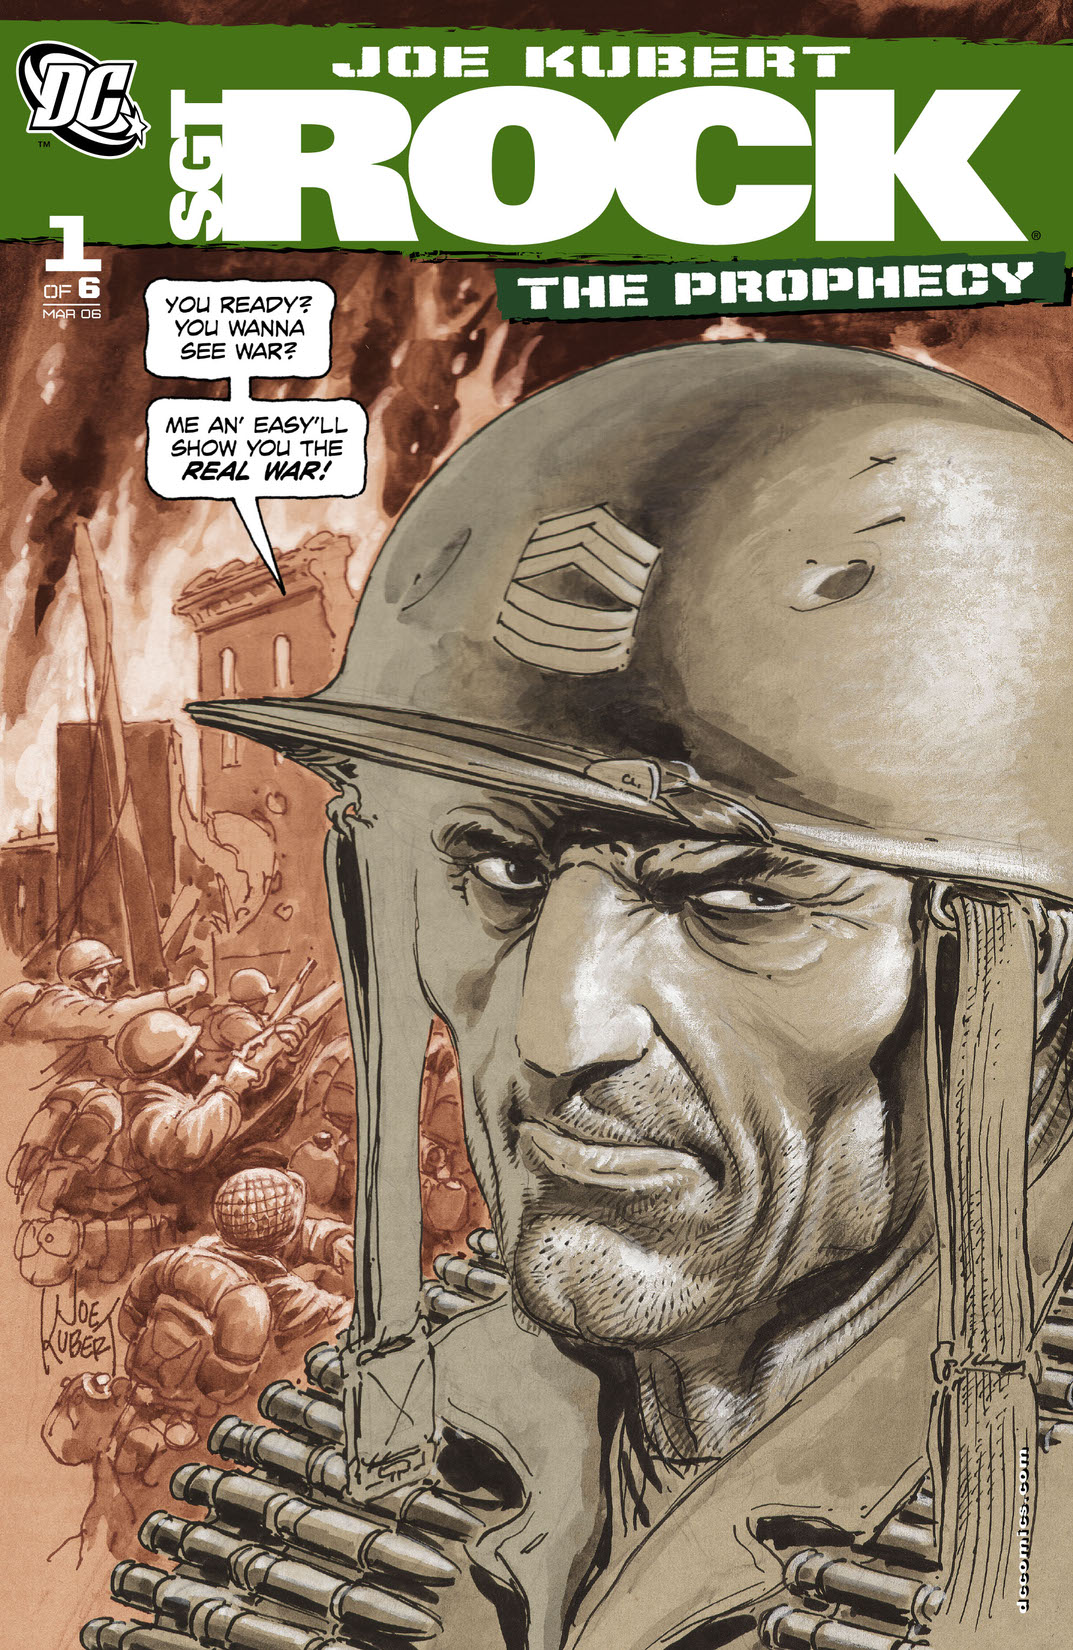 Sgt. Rock: The Prophecy #1 preview images